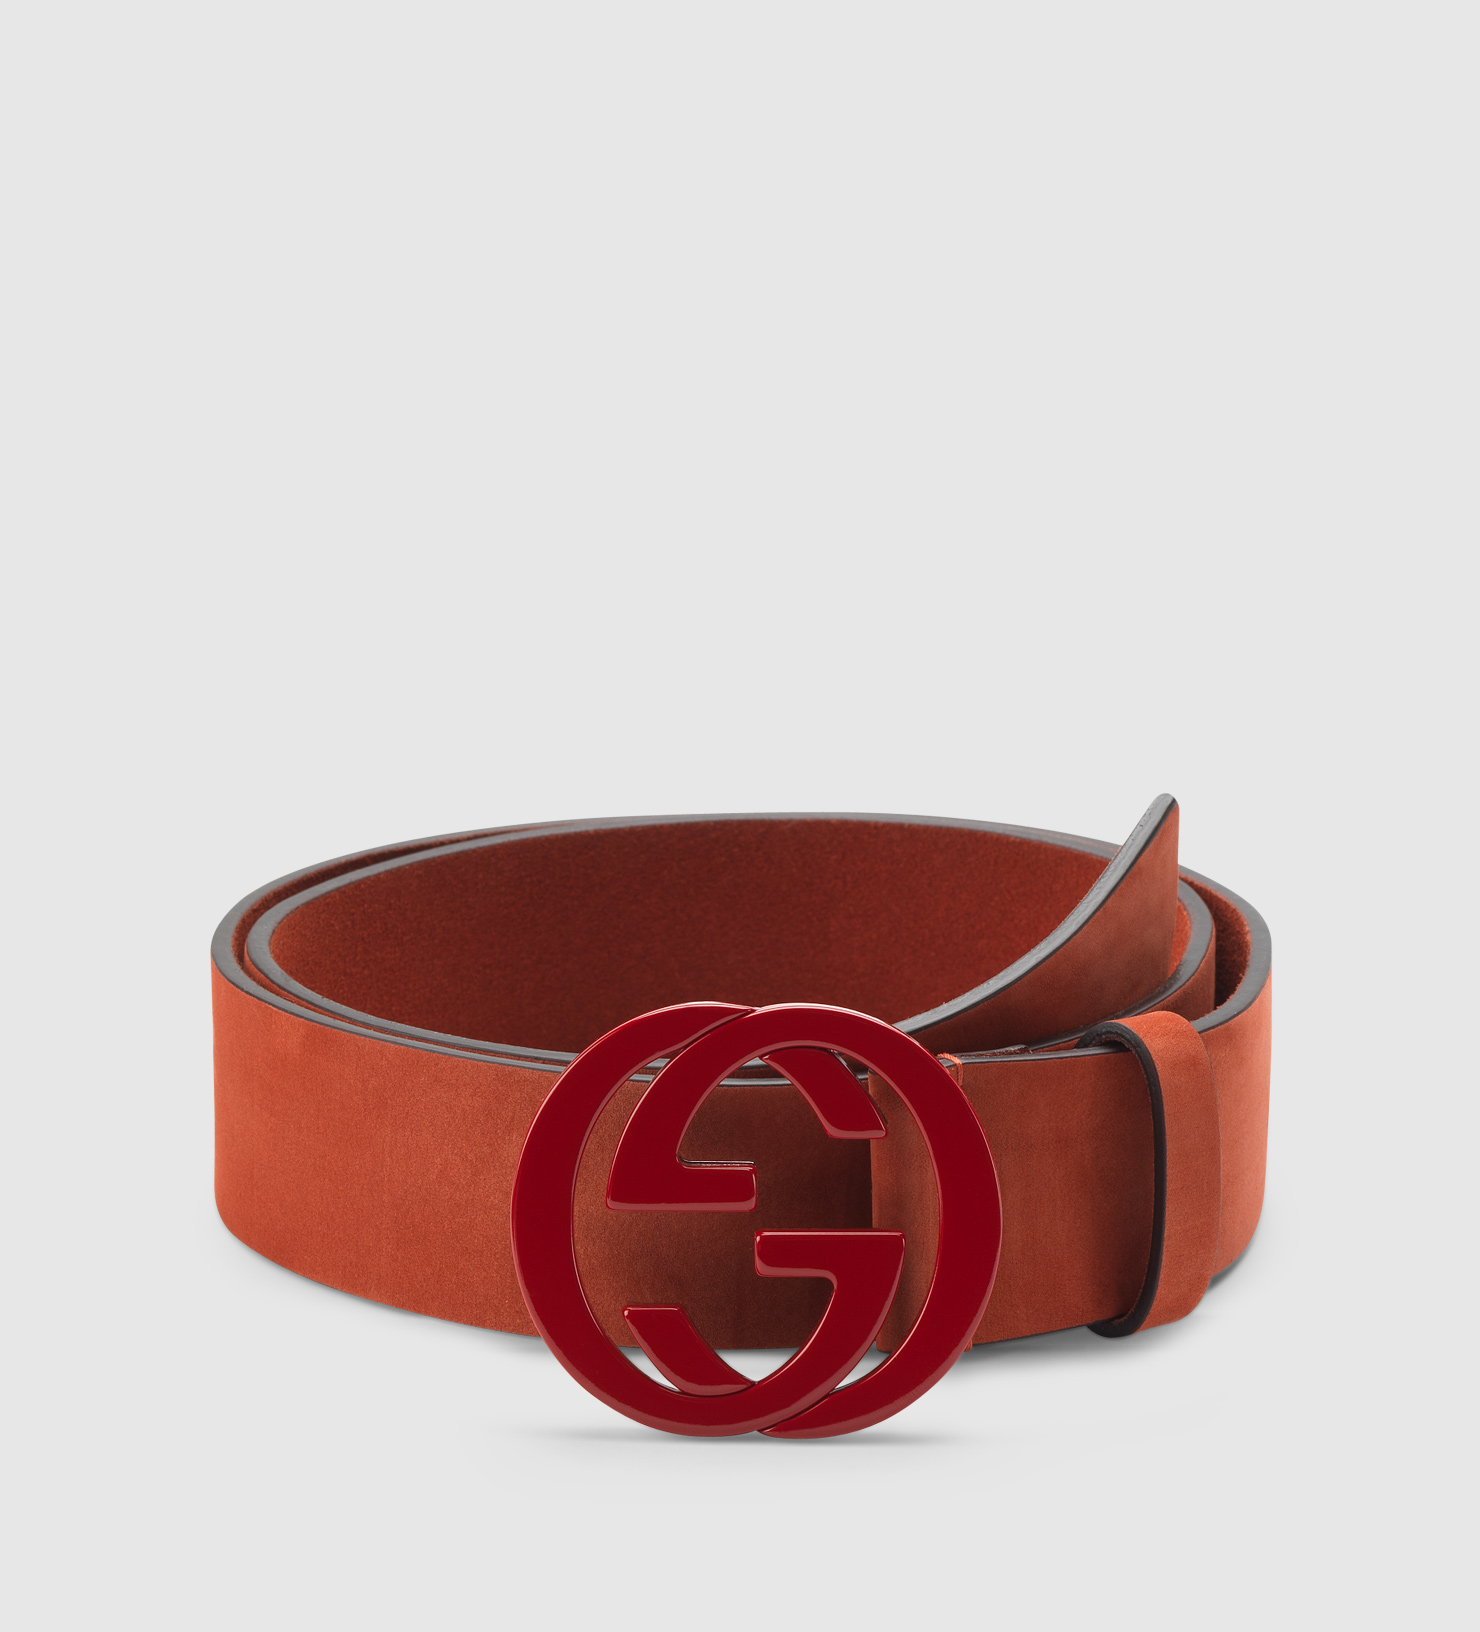 red gucci belt silver buckle